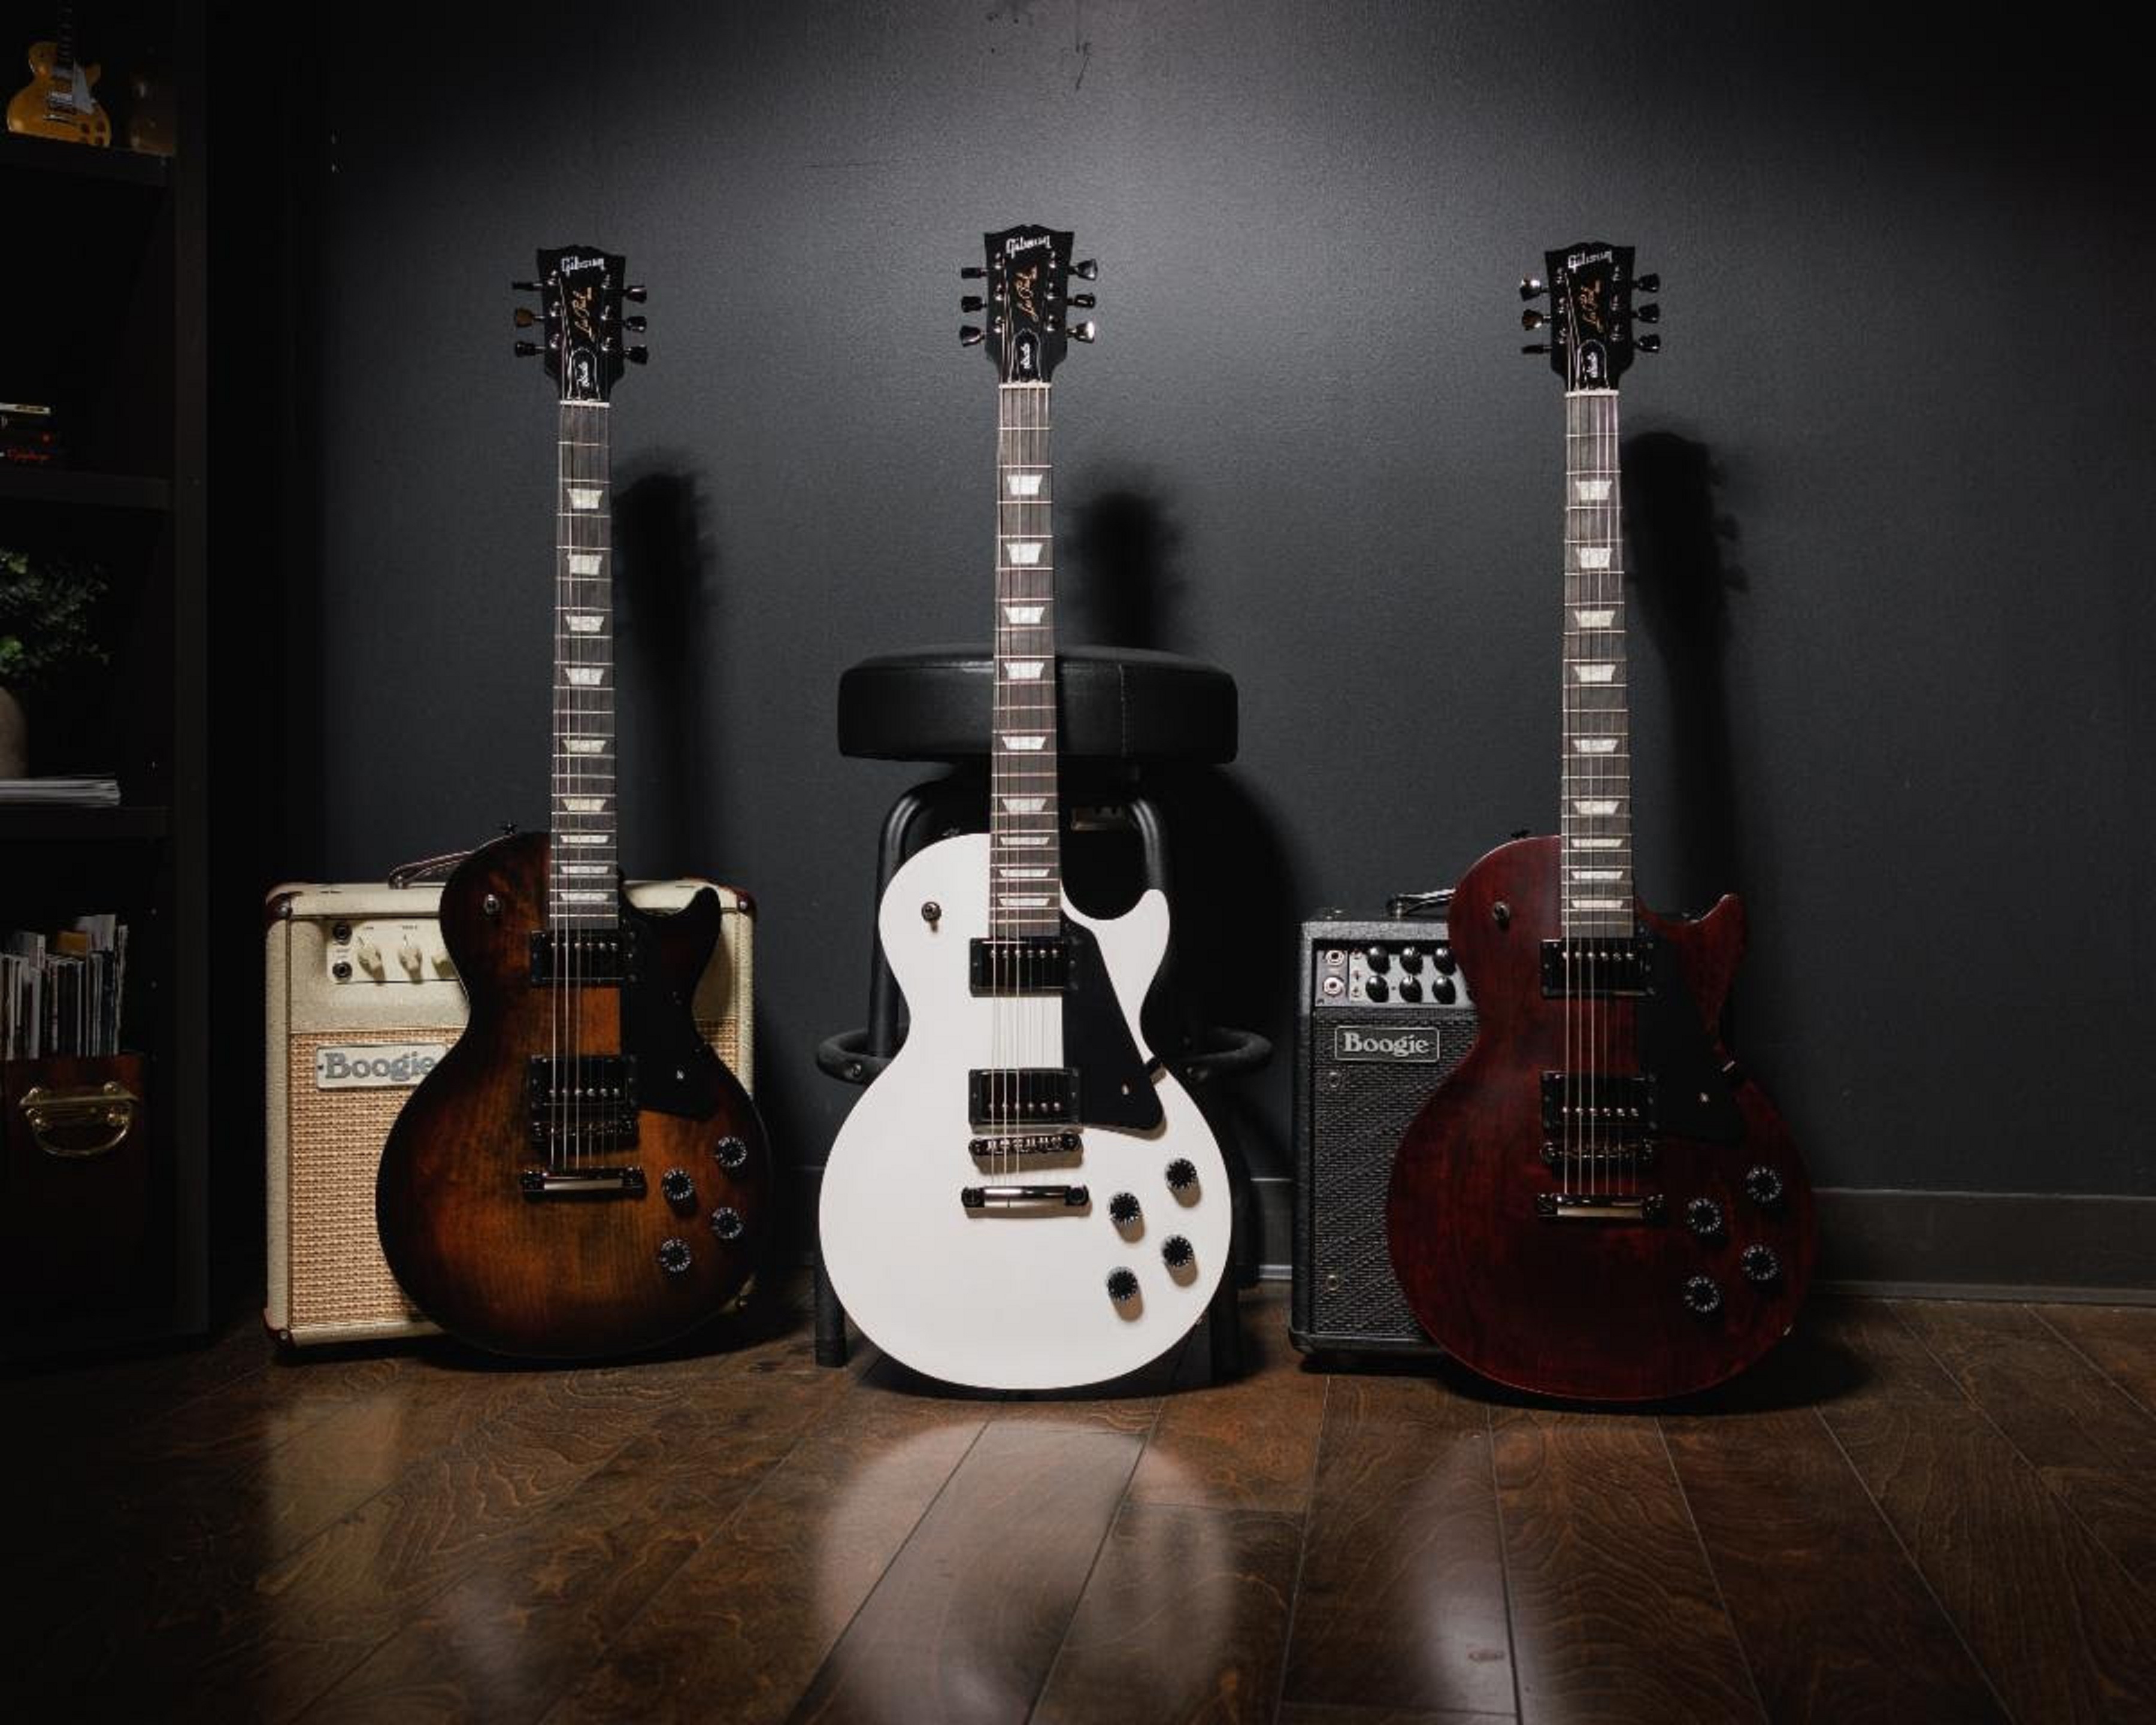 Gibson Unveils the Les Paul Modern Studio, A Legendary Les Paul Studio, Updated With Modern Refinements, Available Worldwide on Gibson.com